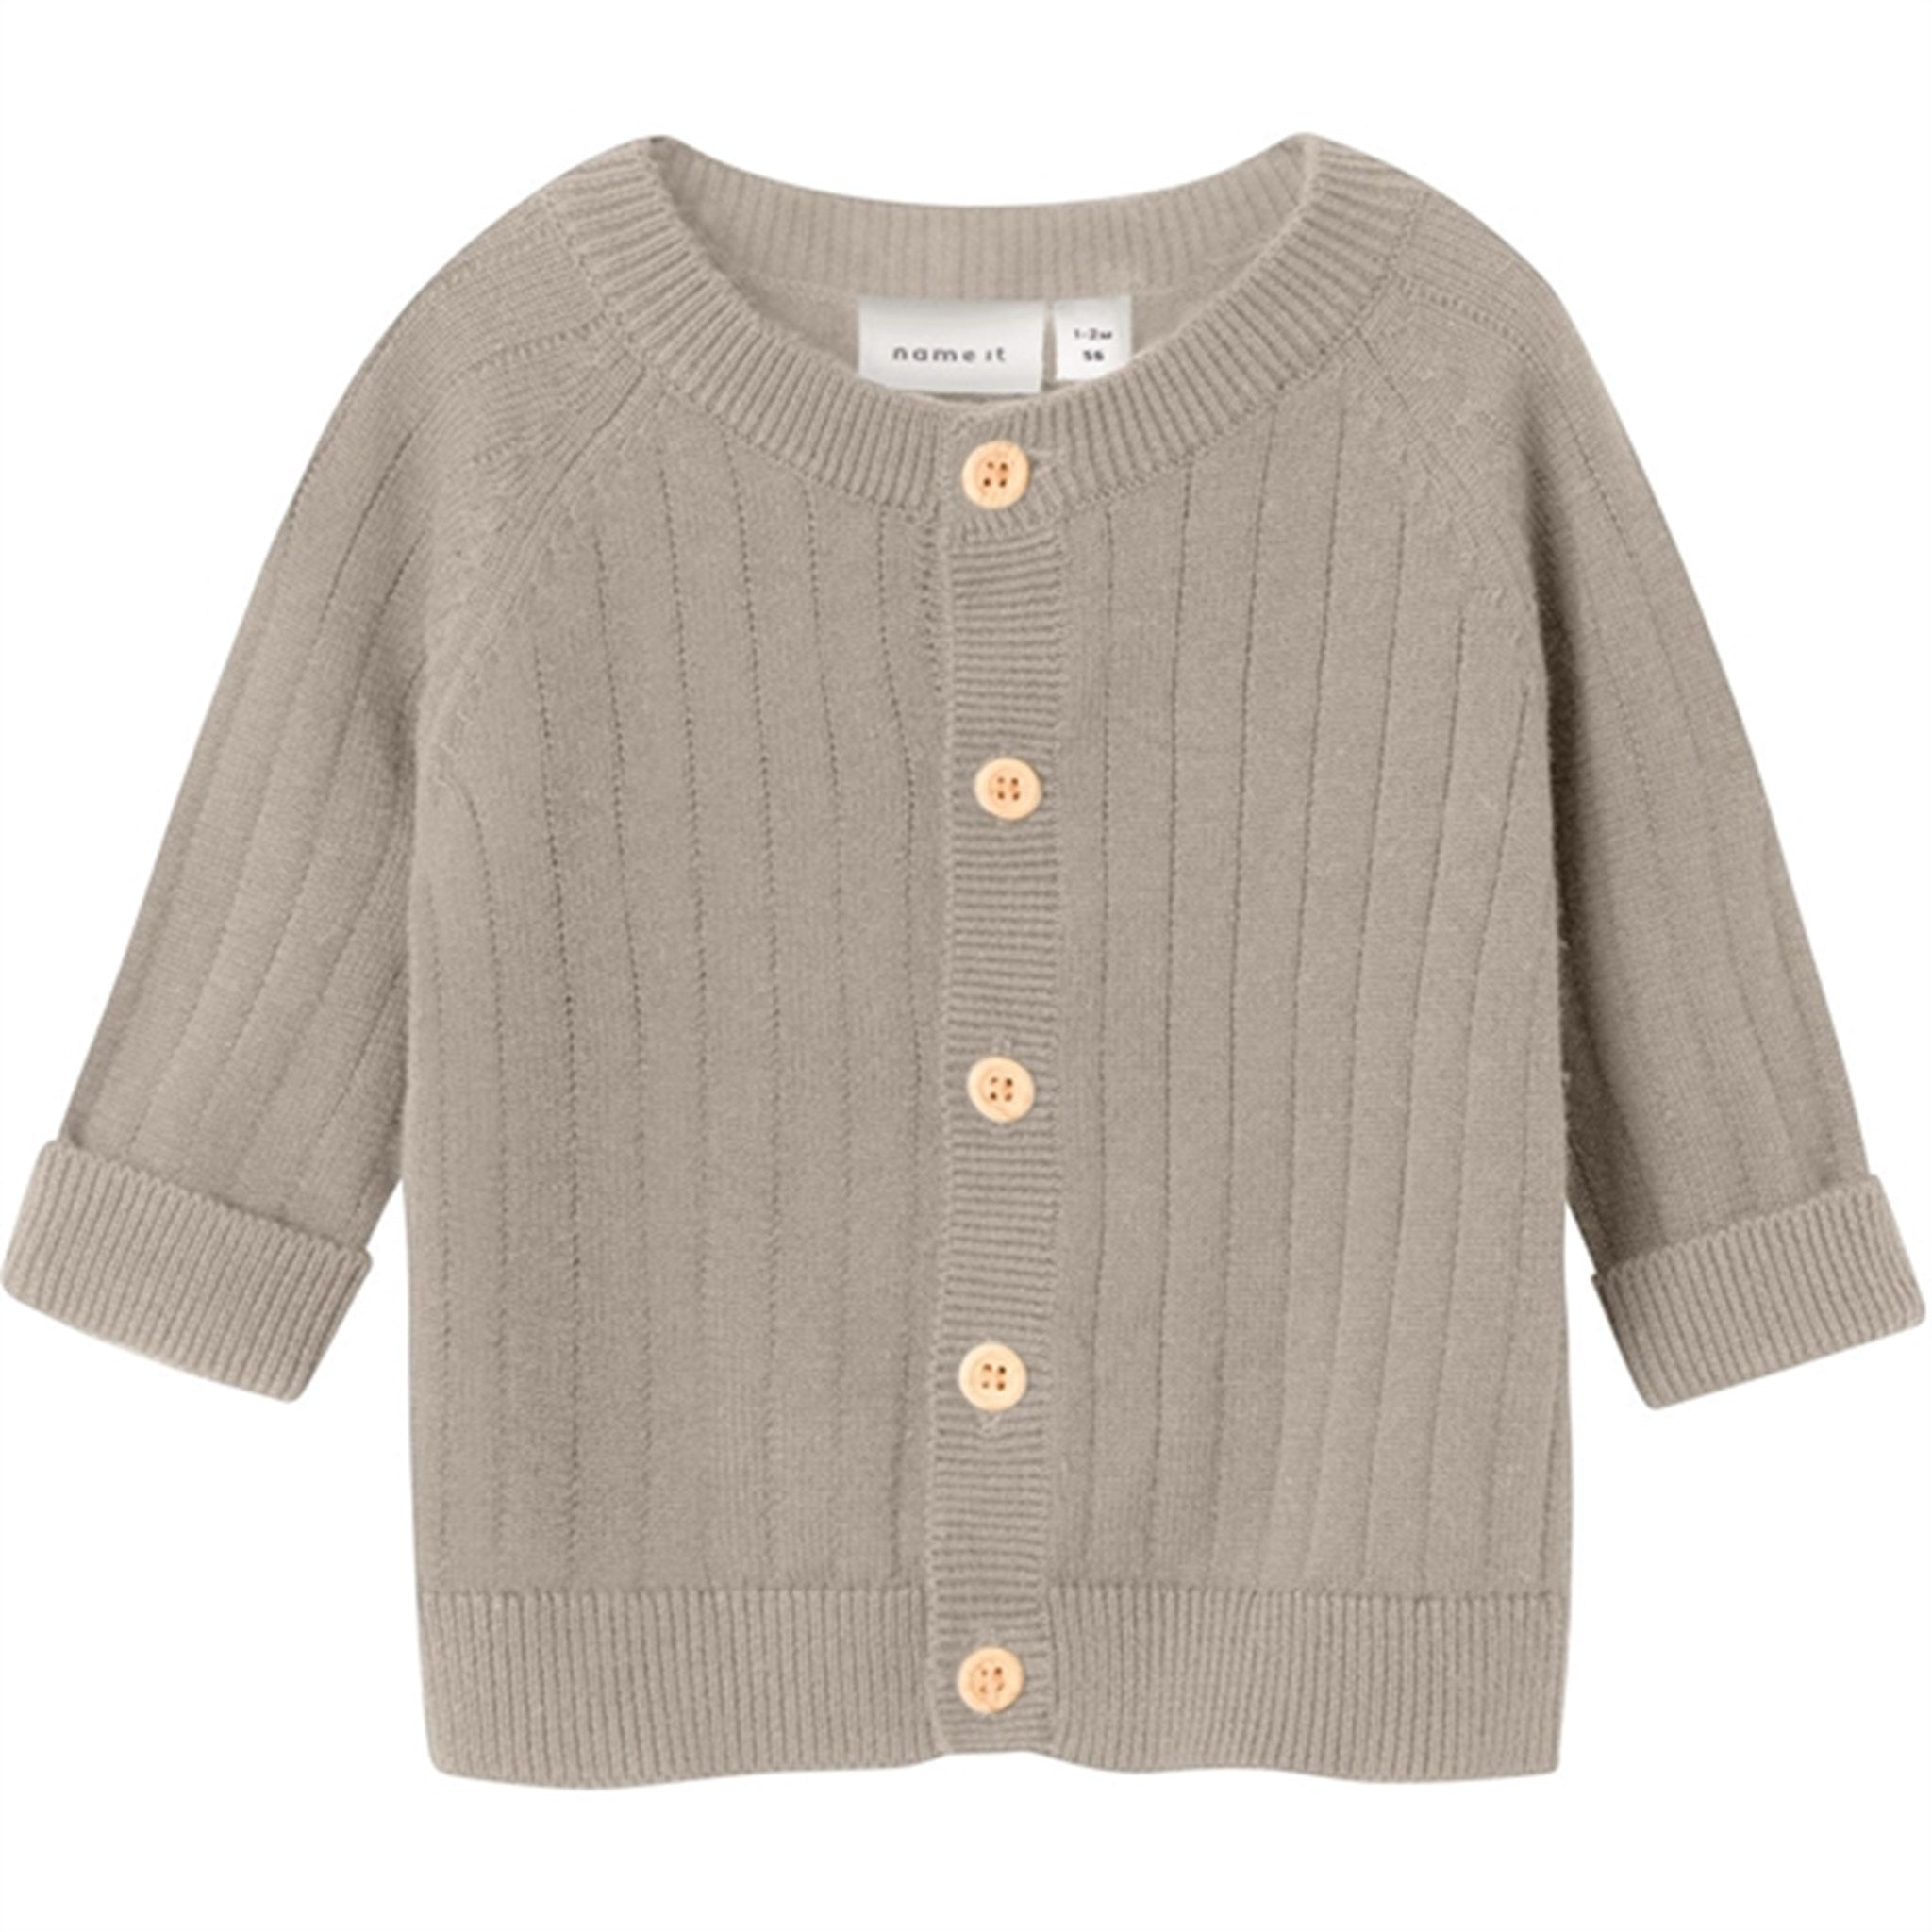 Name it Pure Cashmere Theodor Knit Cardigan